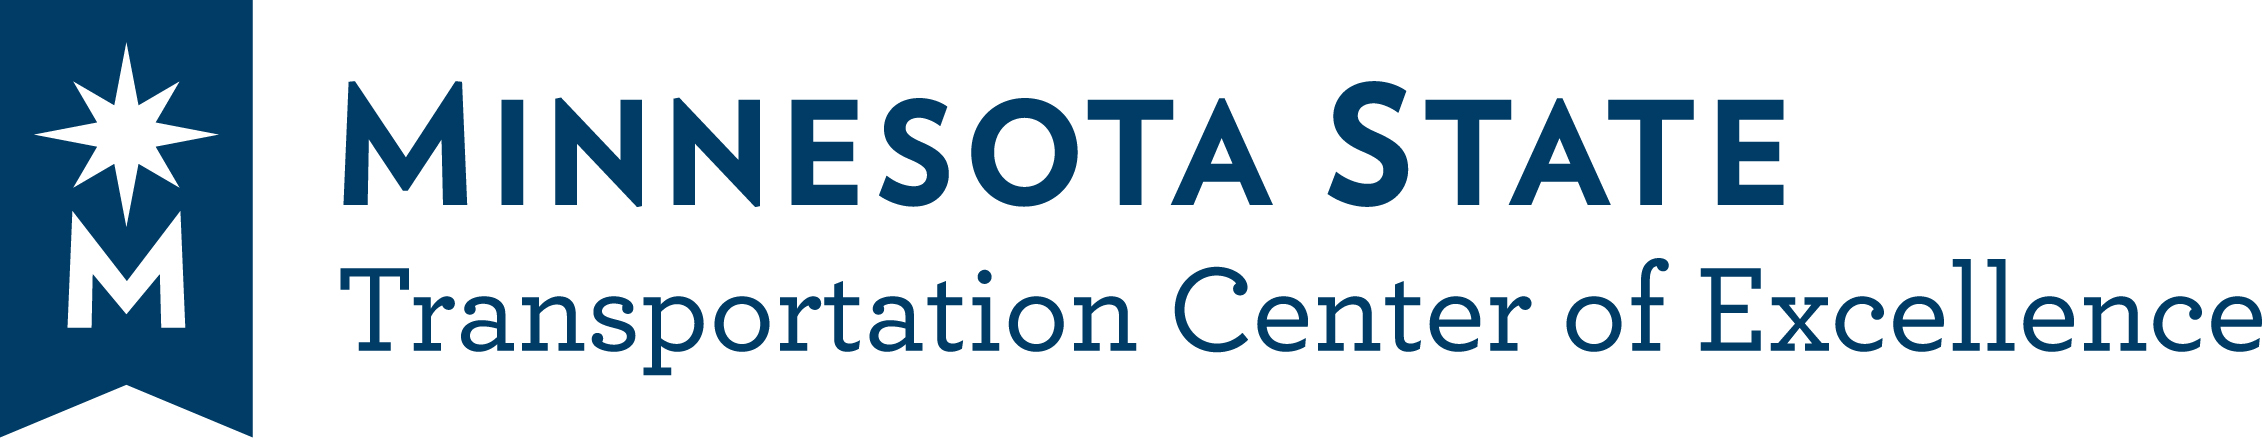 Minnesota State Transportation Center of Excellence Logo in full color